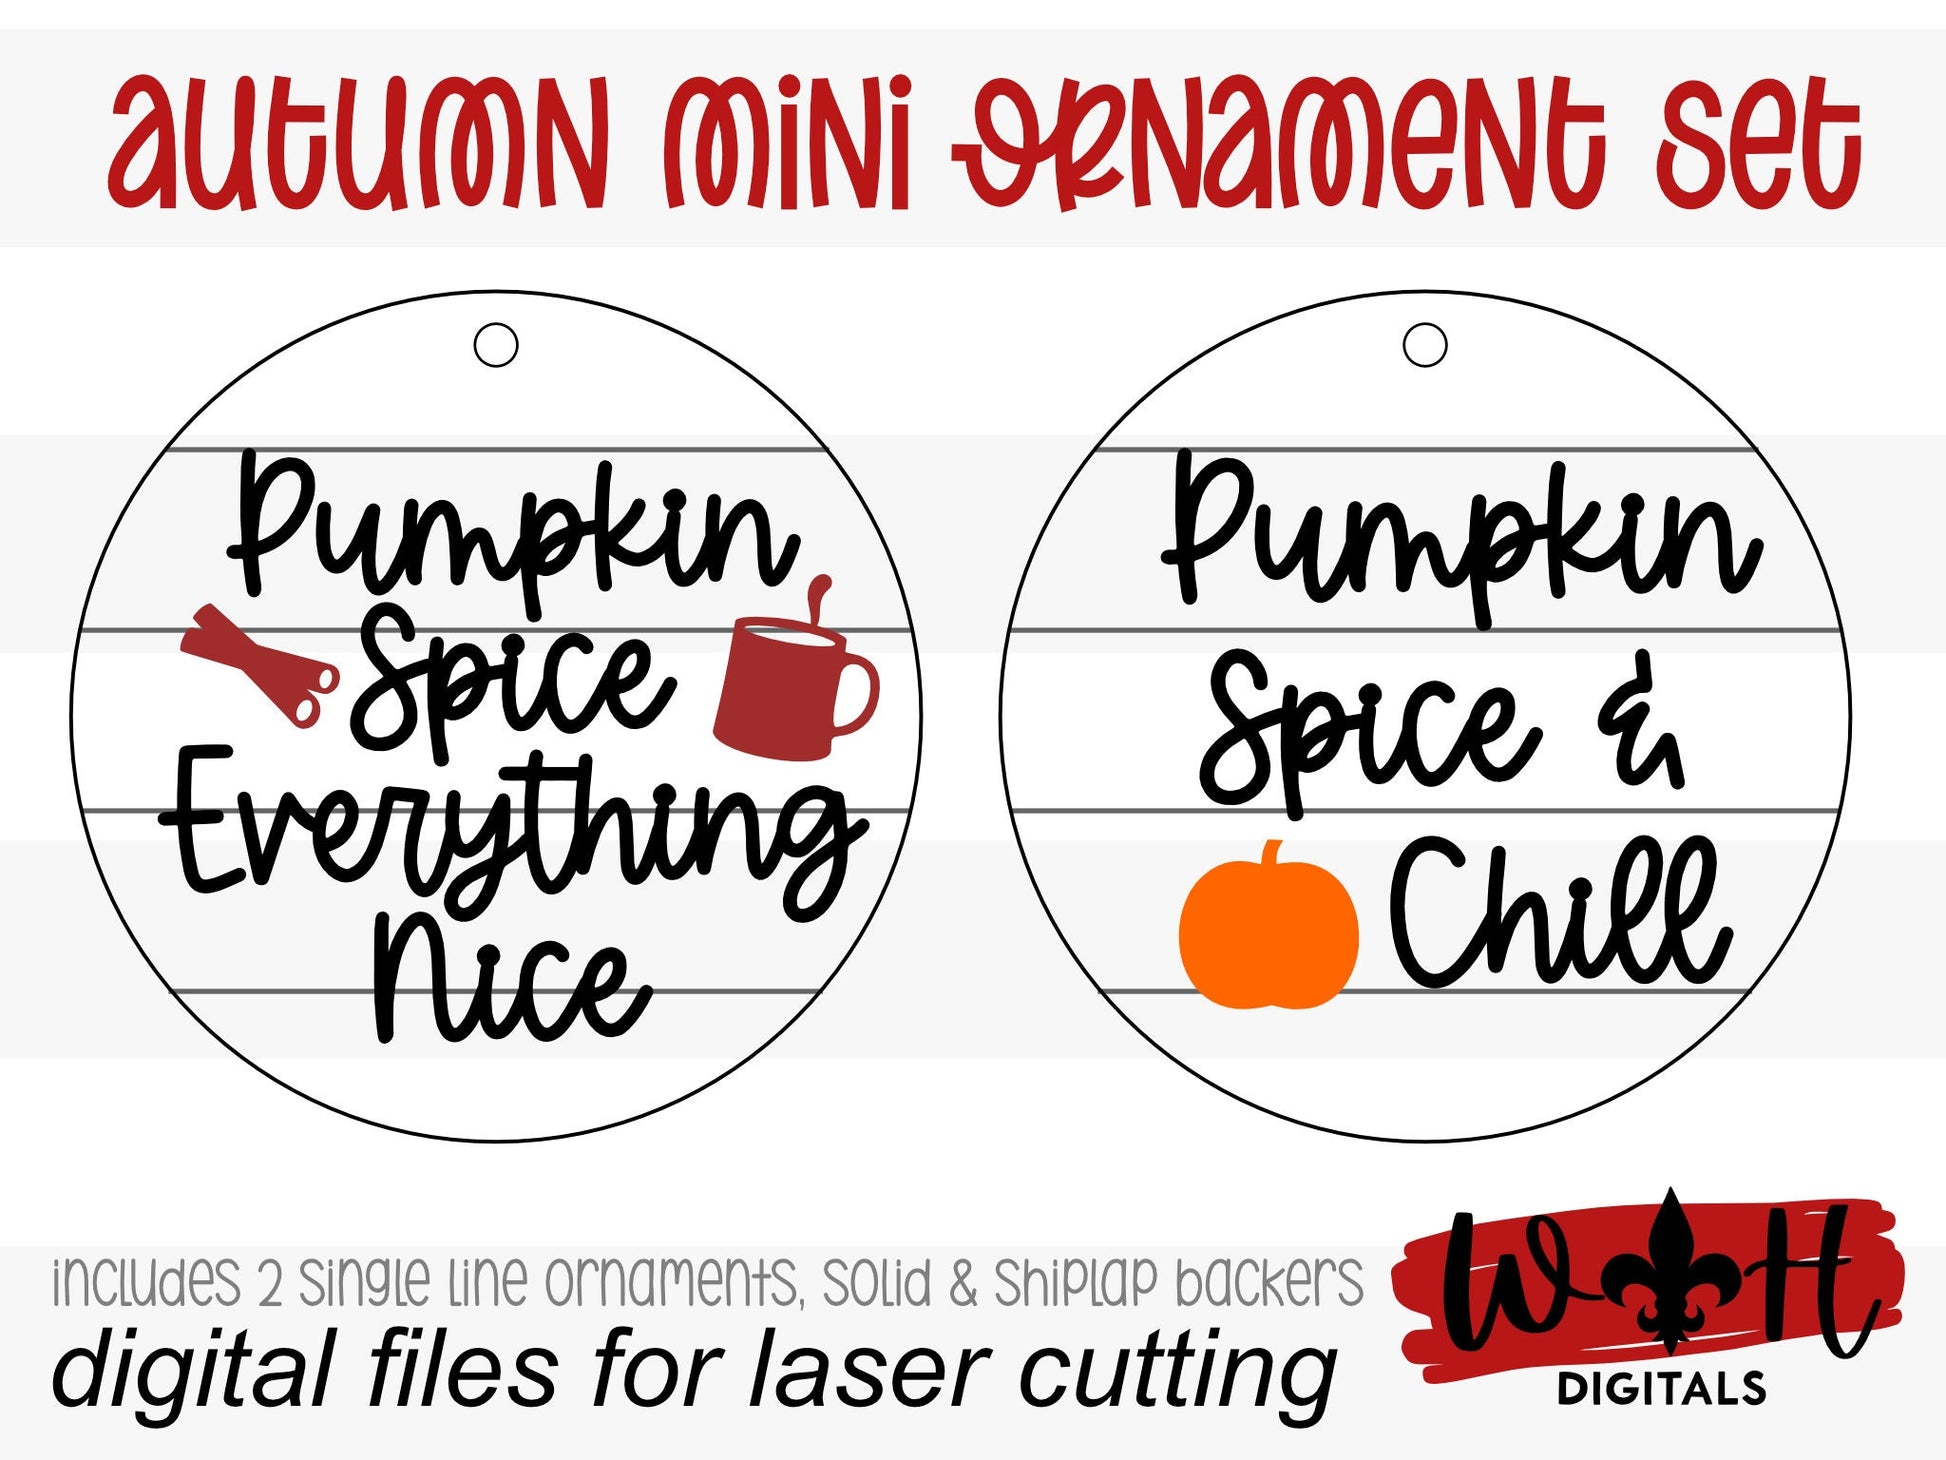 Pumpkin Spice Everything Nice Fall Traditions Mini Ornament Set - Digital Files for Cutting Machines and Glowforge Lasers - Digital SVG File